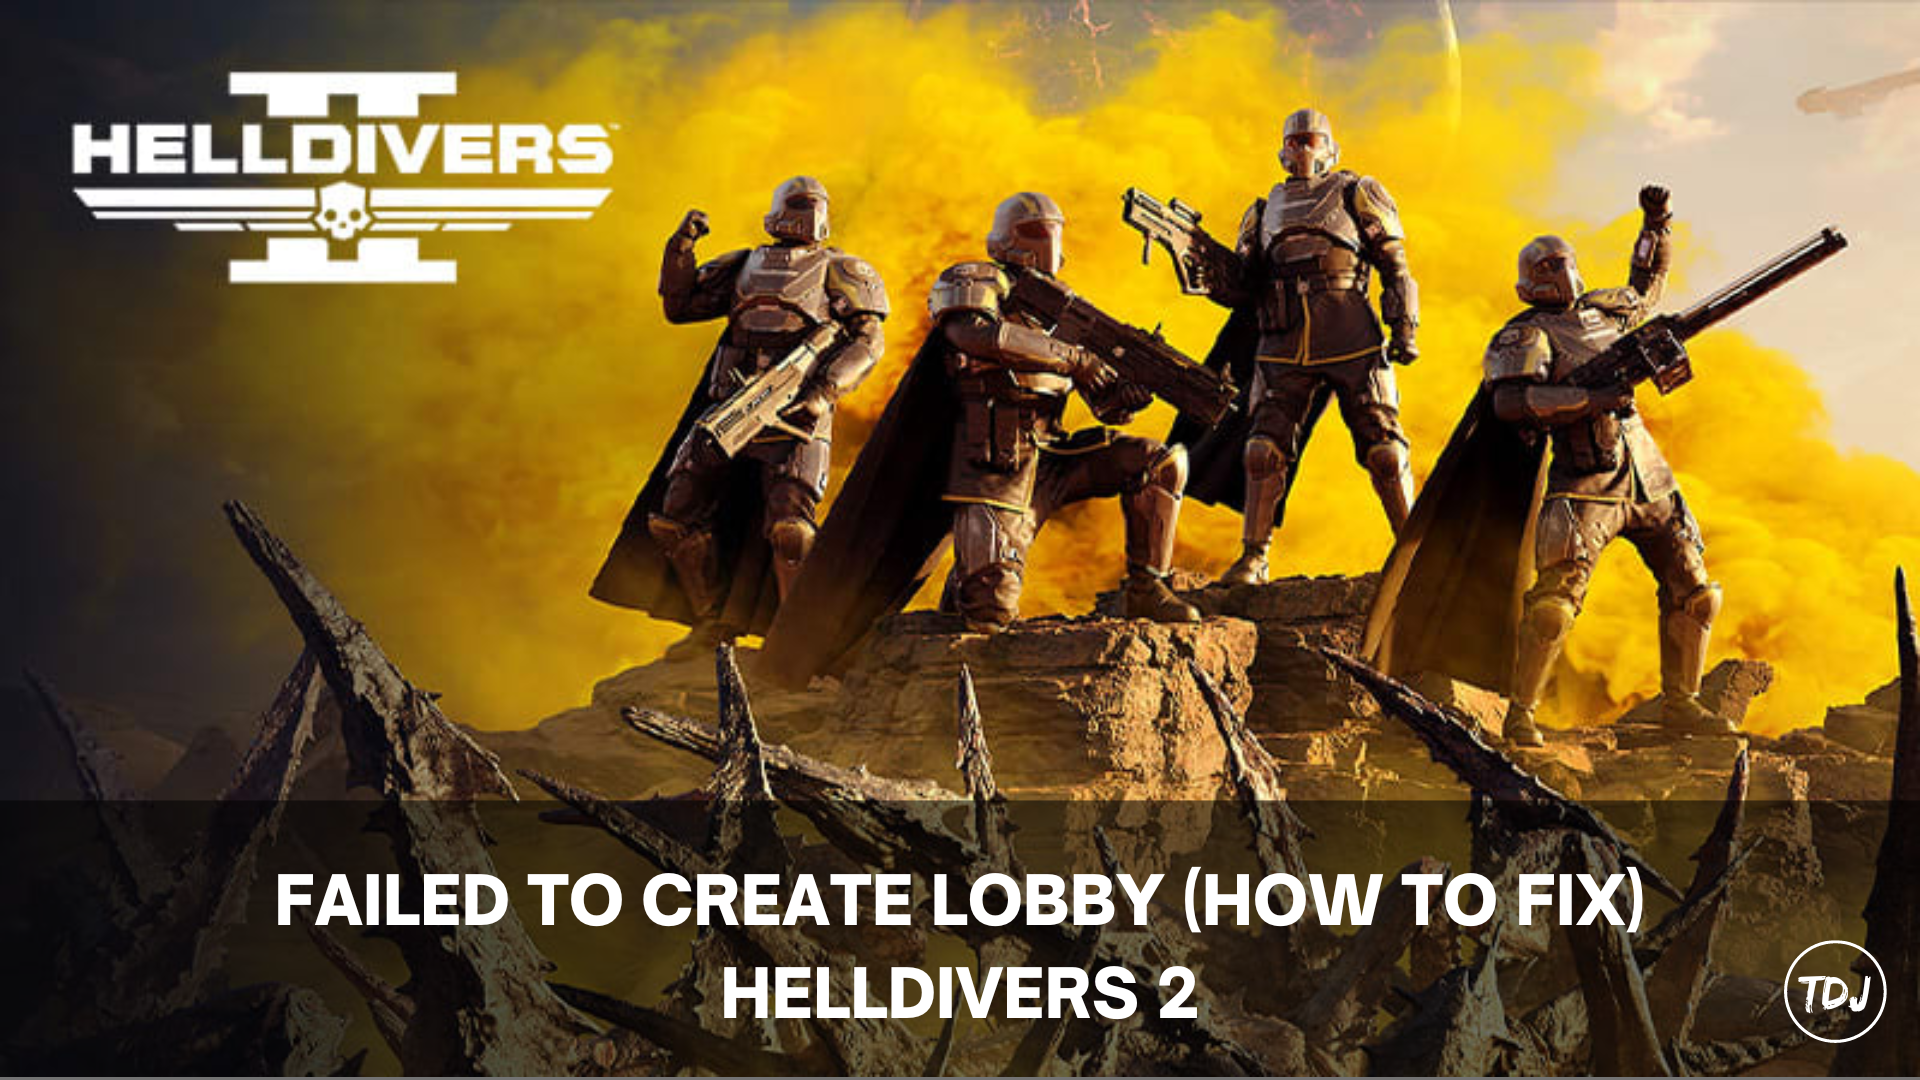 helldivers 2 failed to create lobby (how to fix)